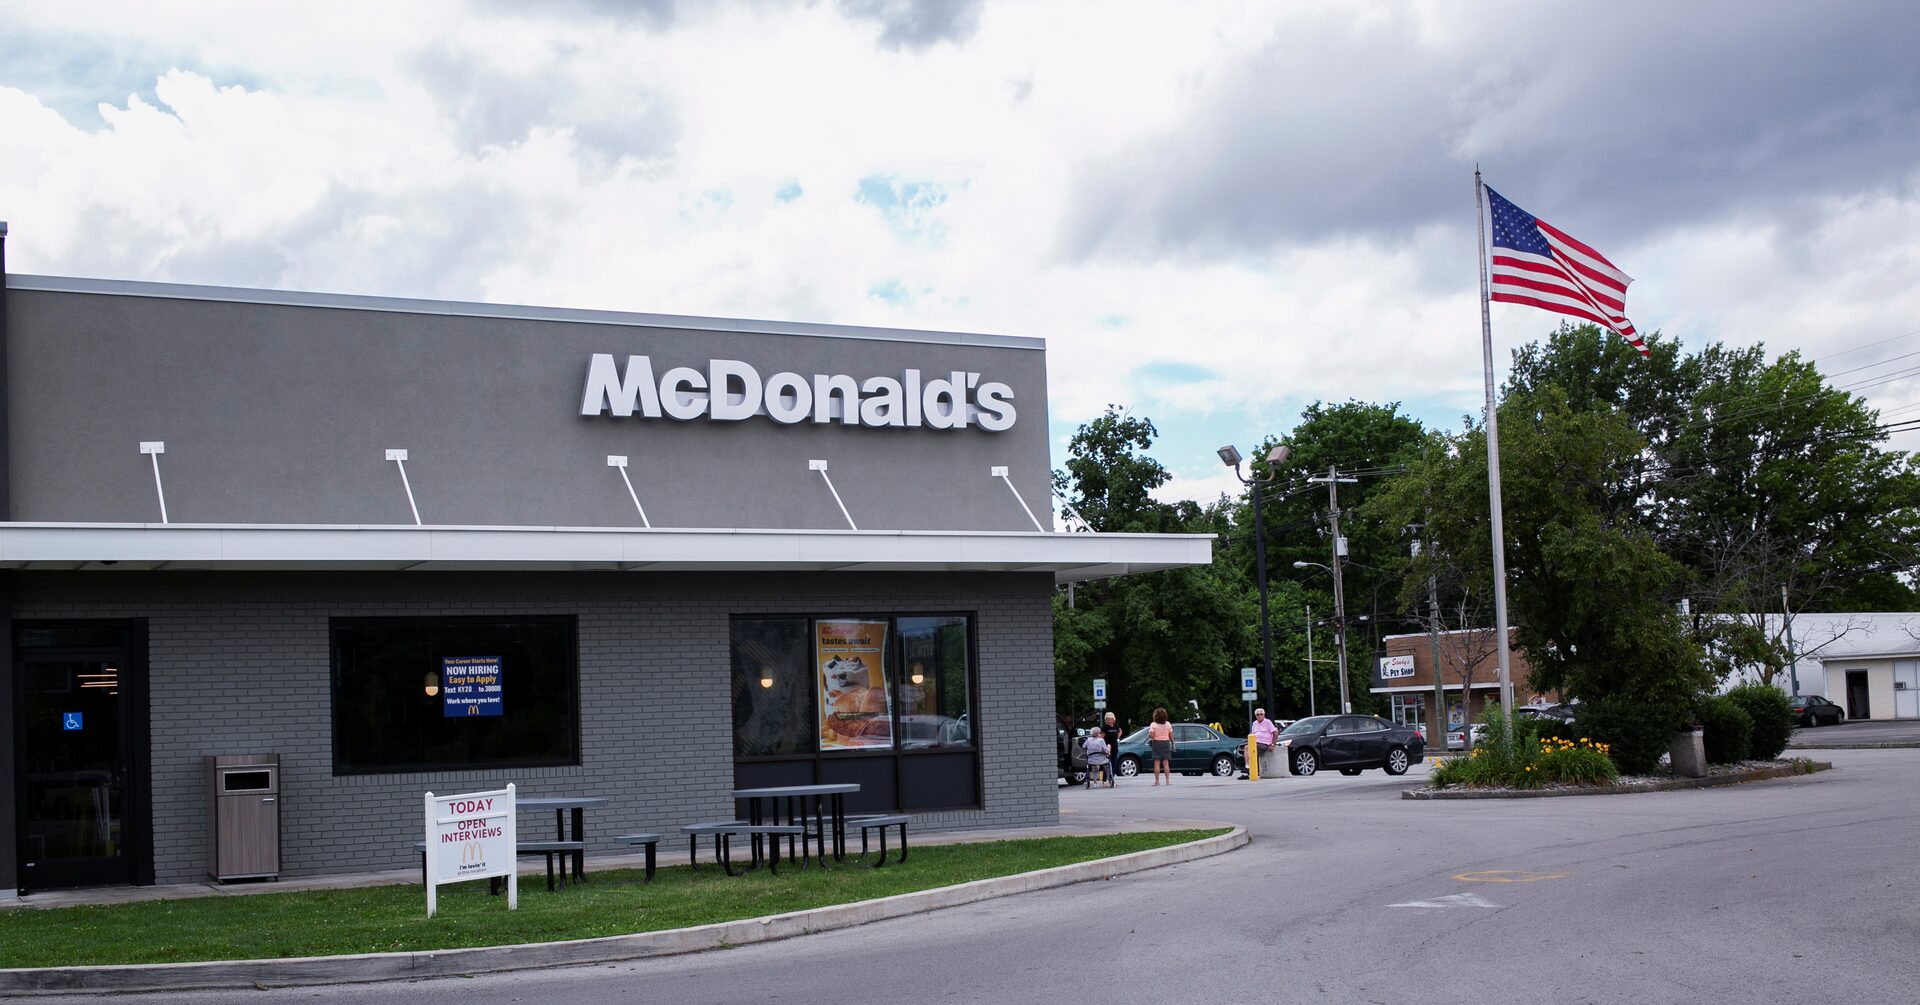 McDonald's Launches Massive Summer Hiring in Kentucky, Offers College Tuition Support---